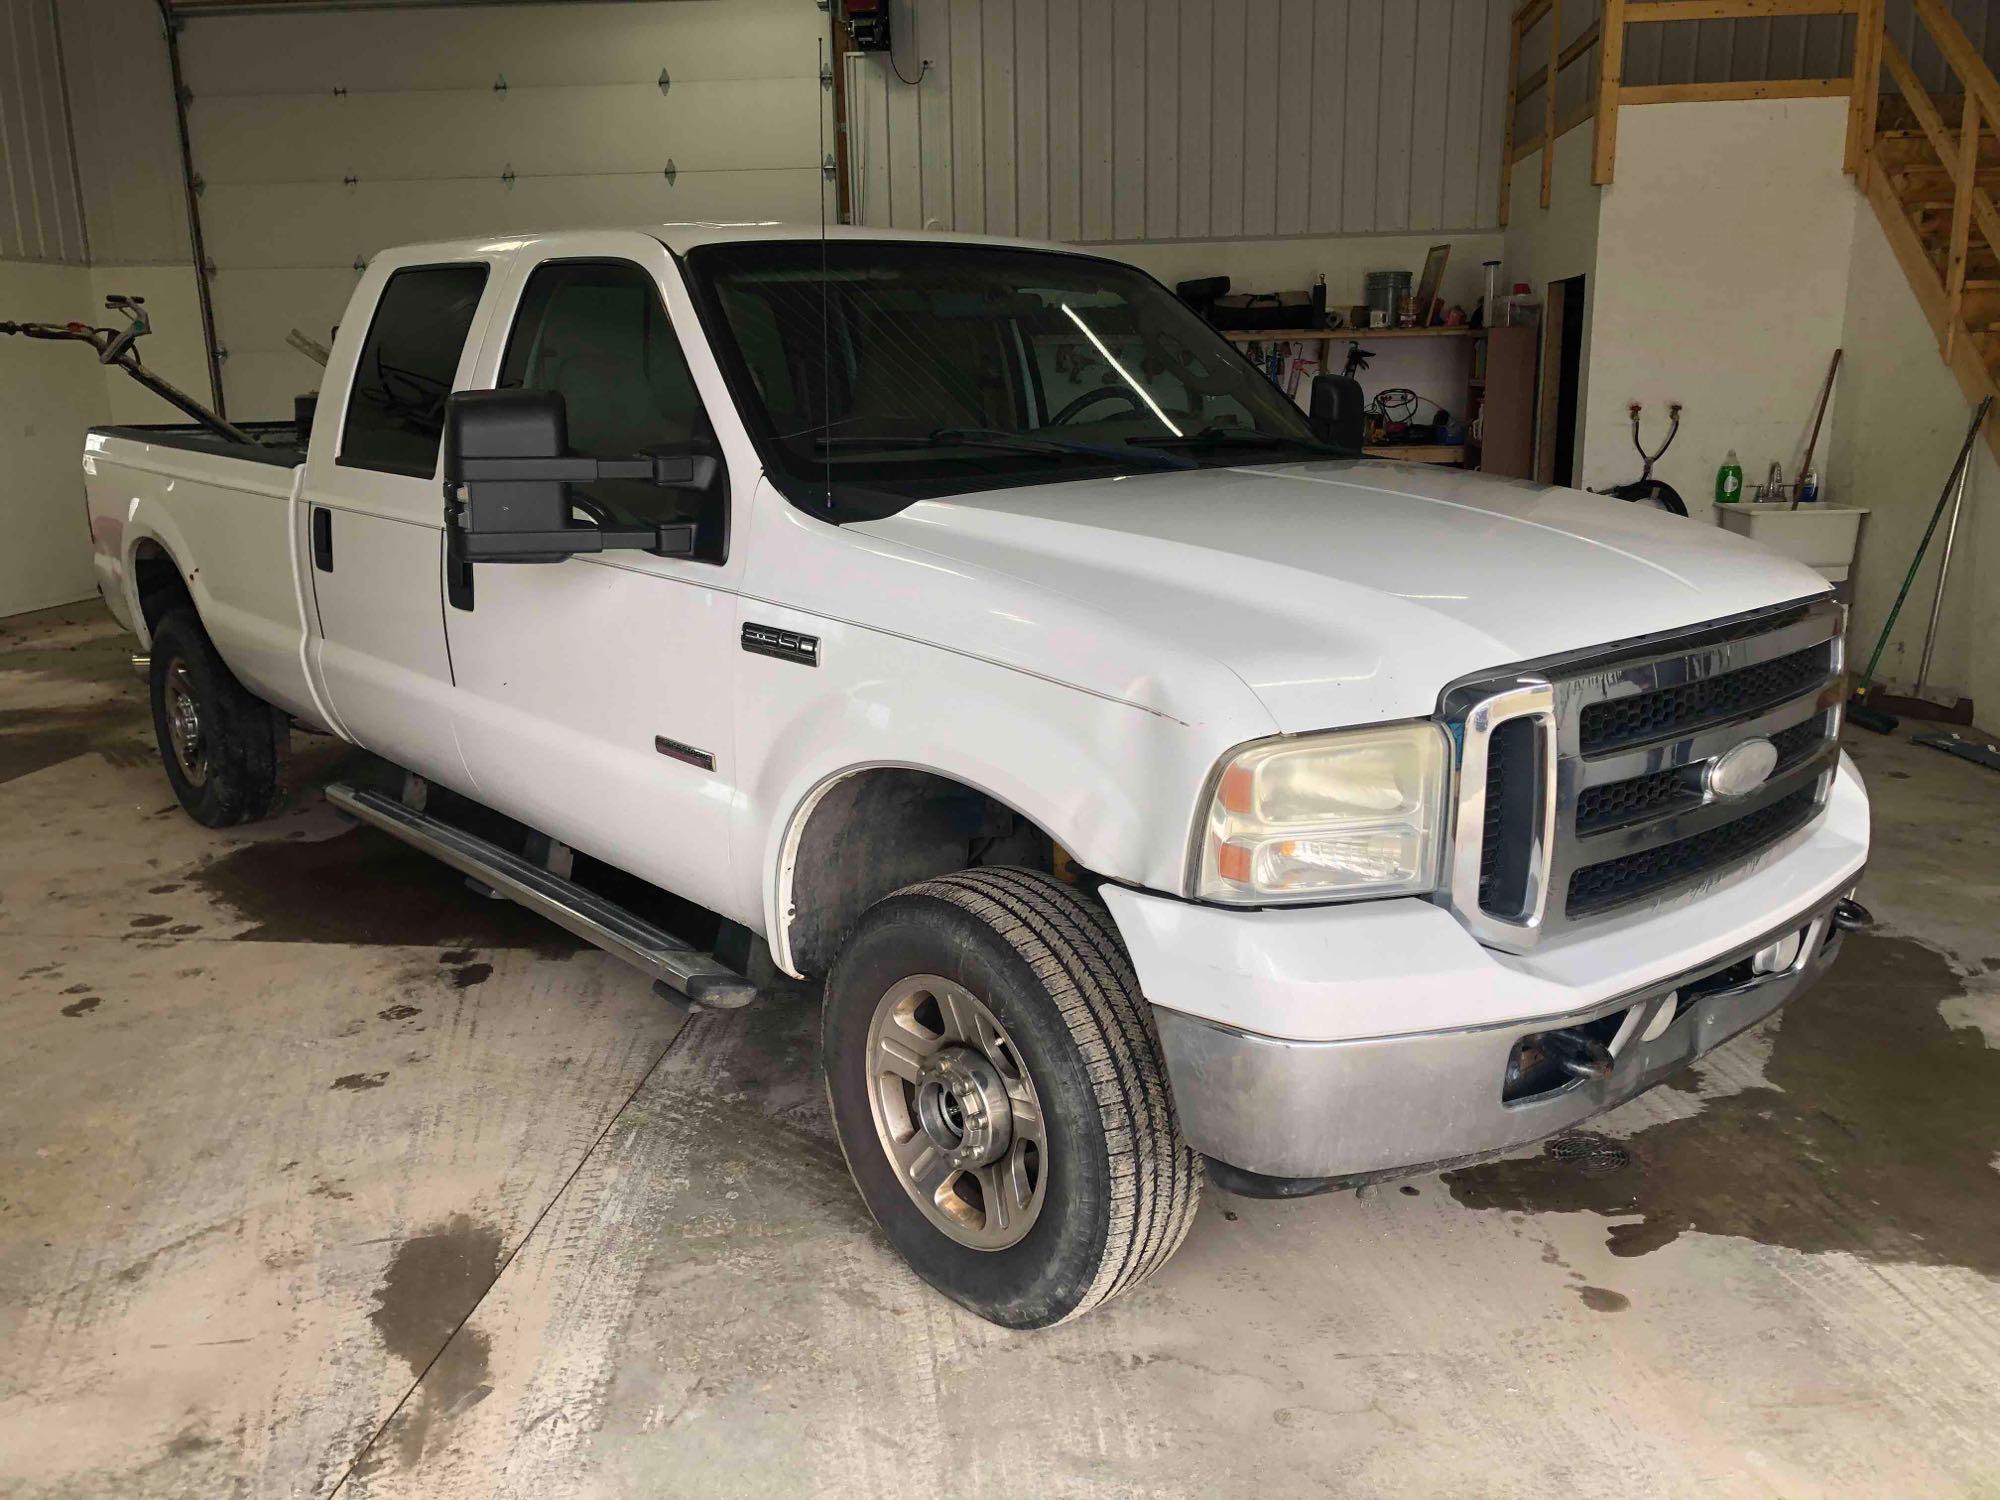 2007 Ford F-250 Pickup Truck, VIN # 1FTSW21P27EA75875